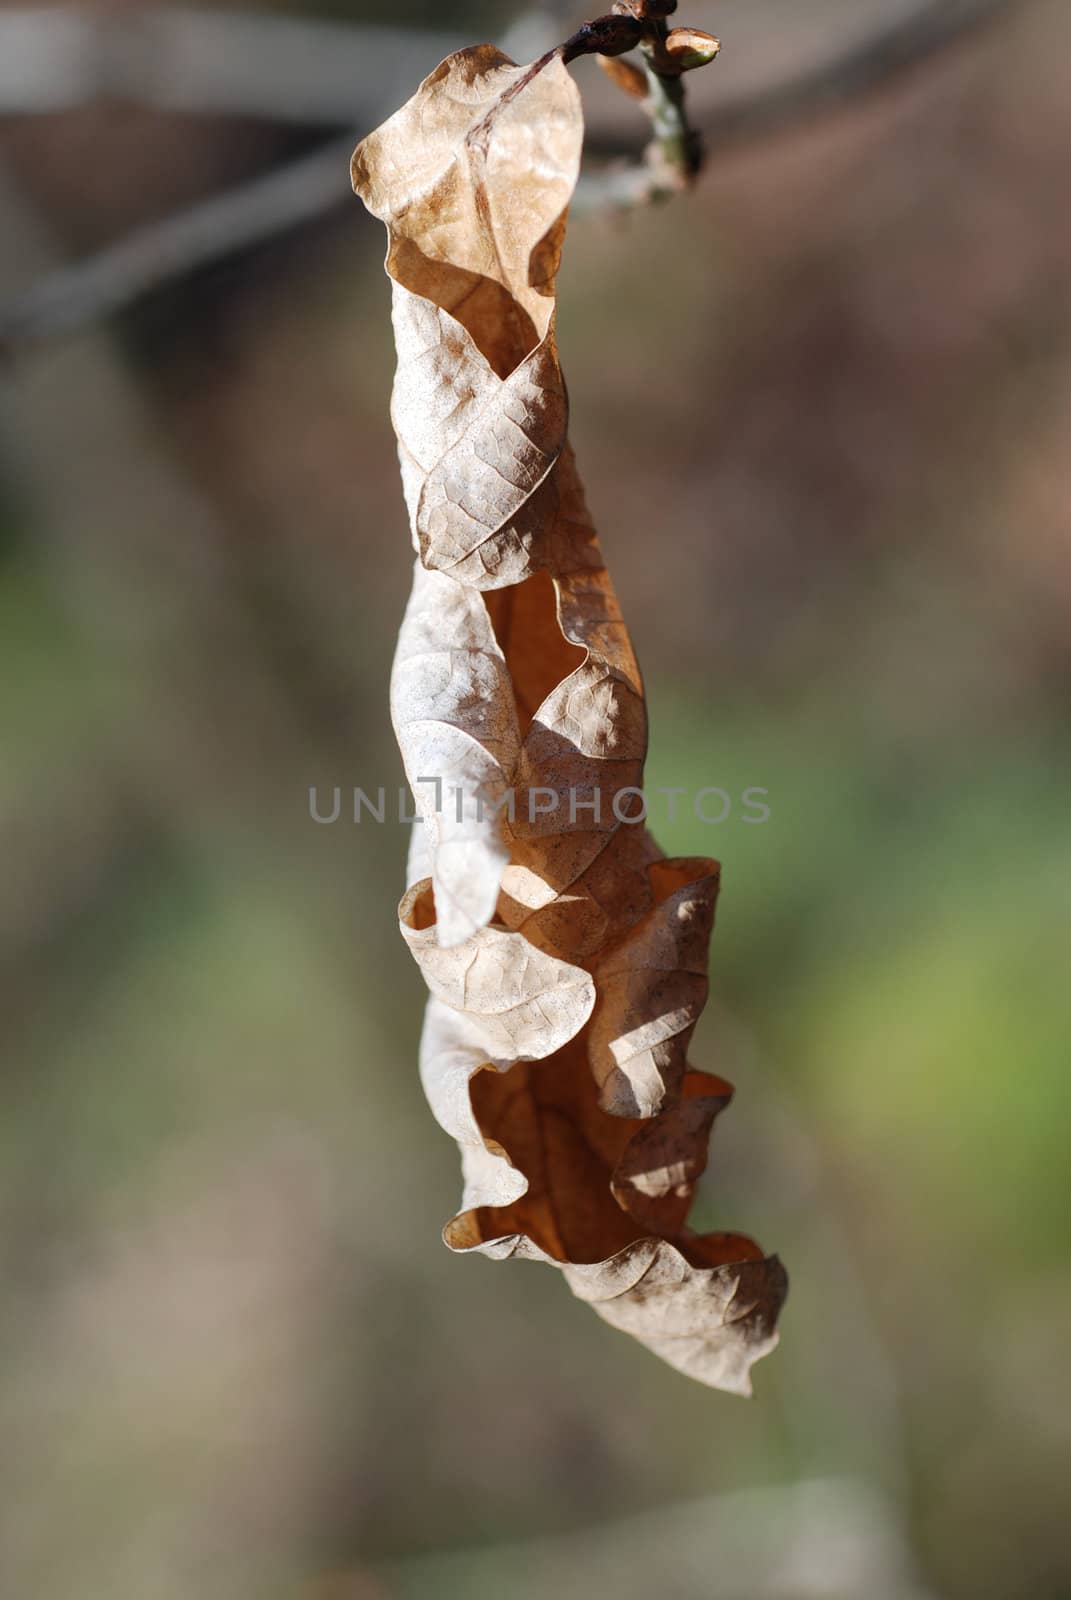 A close-up of a dead leaf hanging from a branch in the woods.